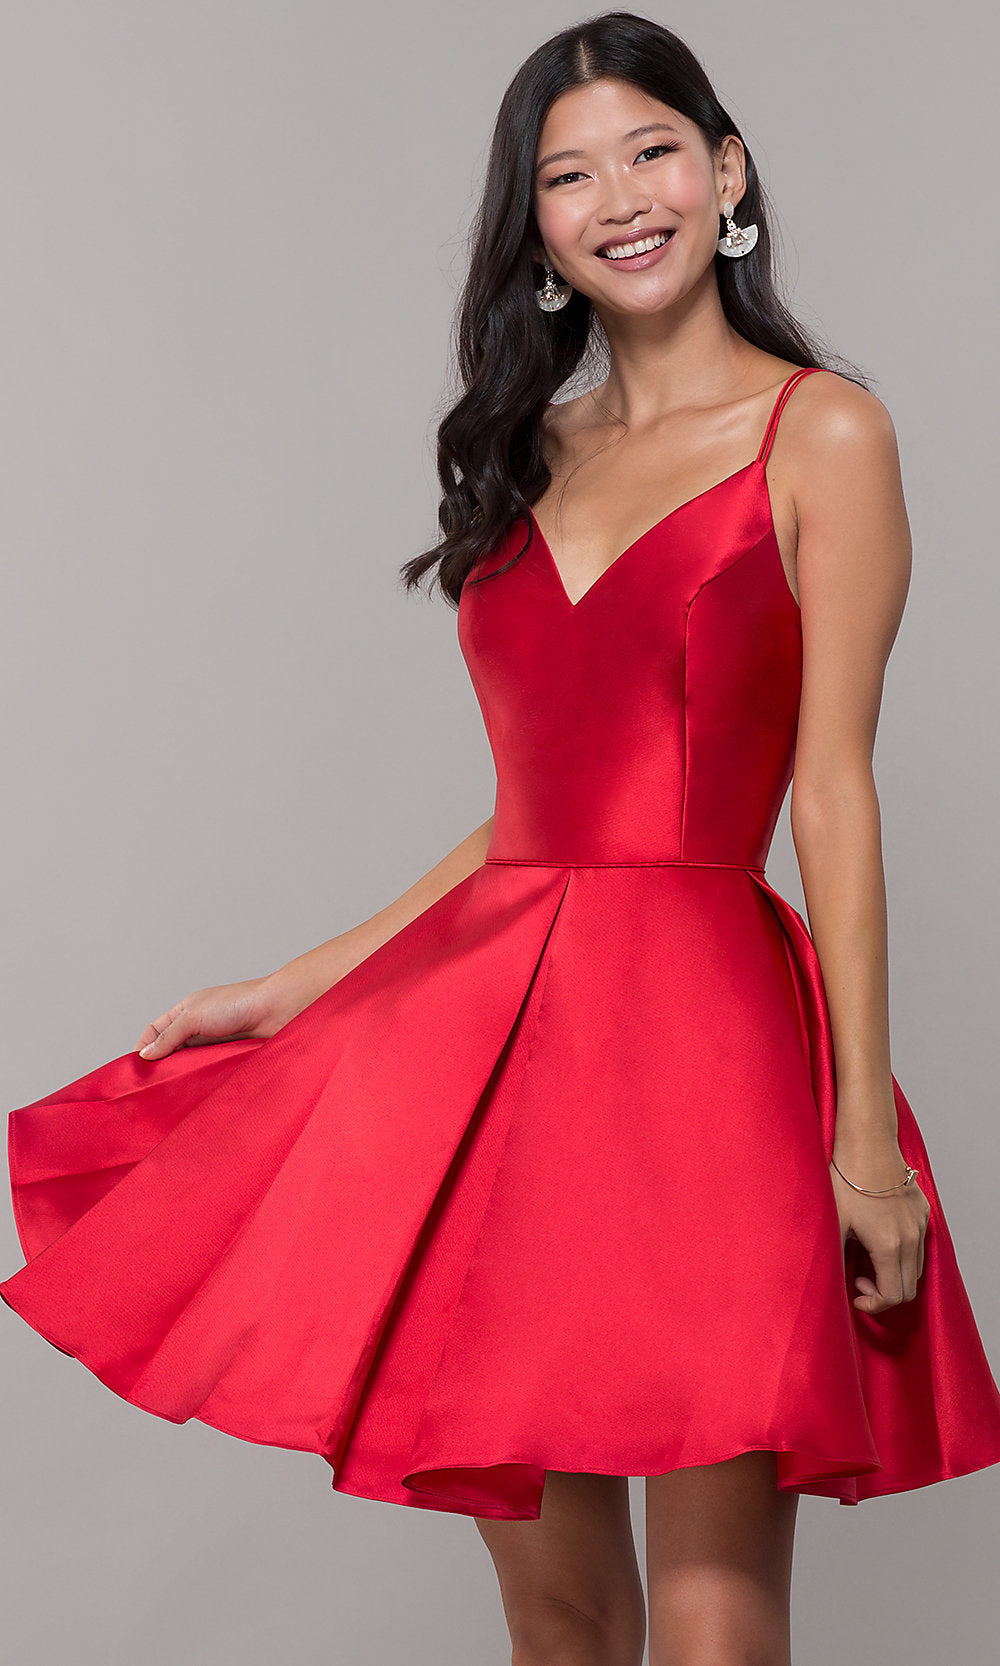  Semi-Formal A-Line Alyce Homecoming Dress in Satin